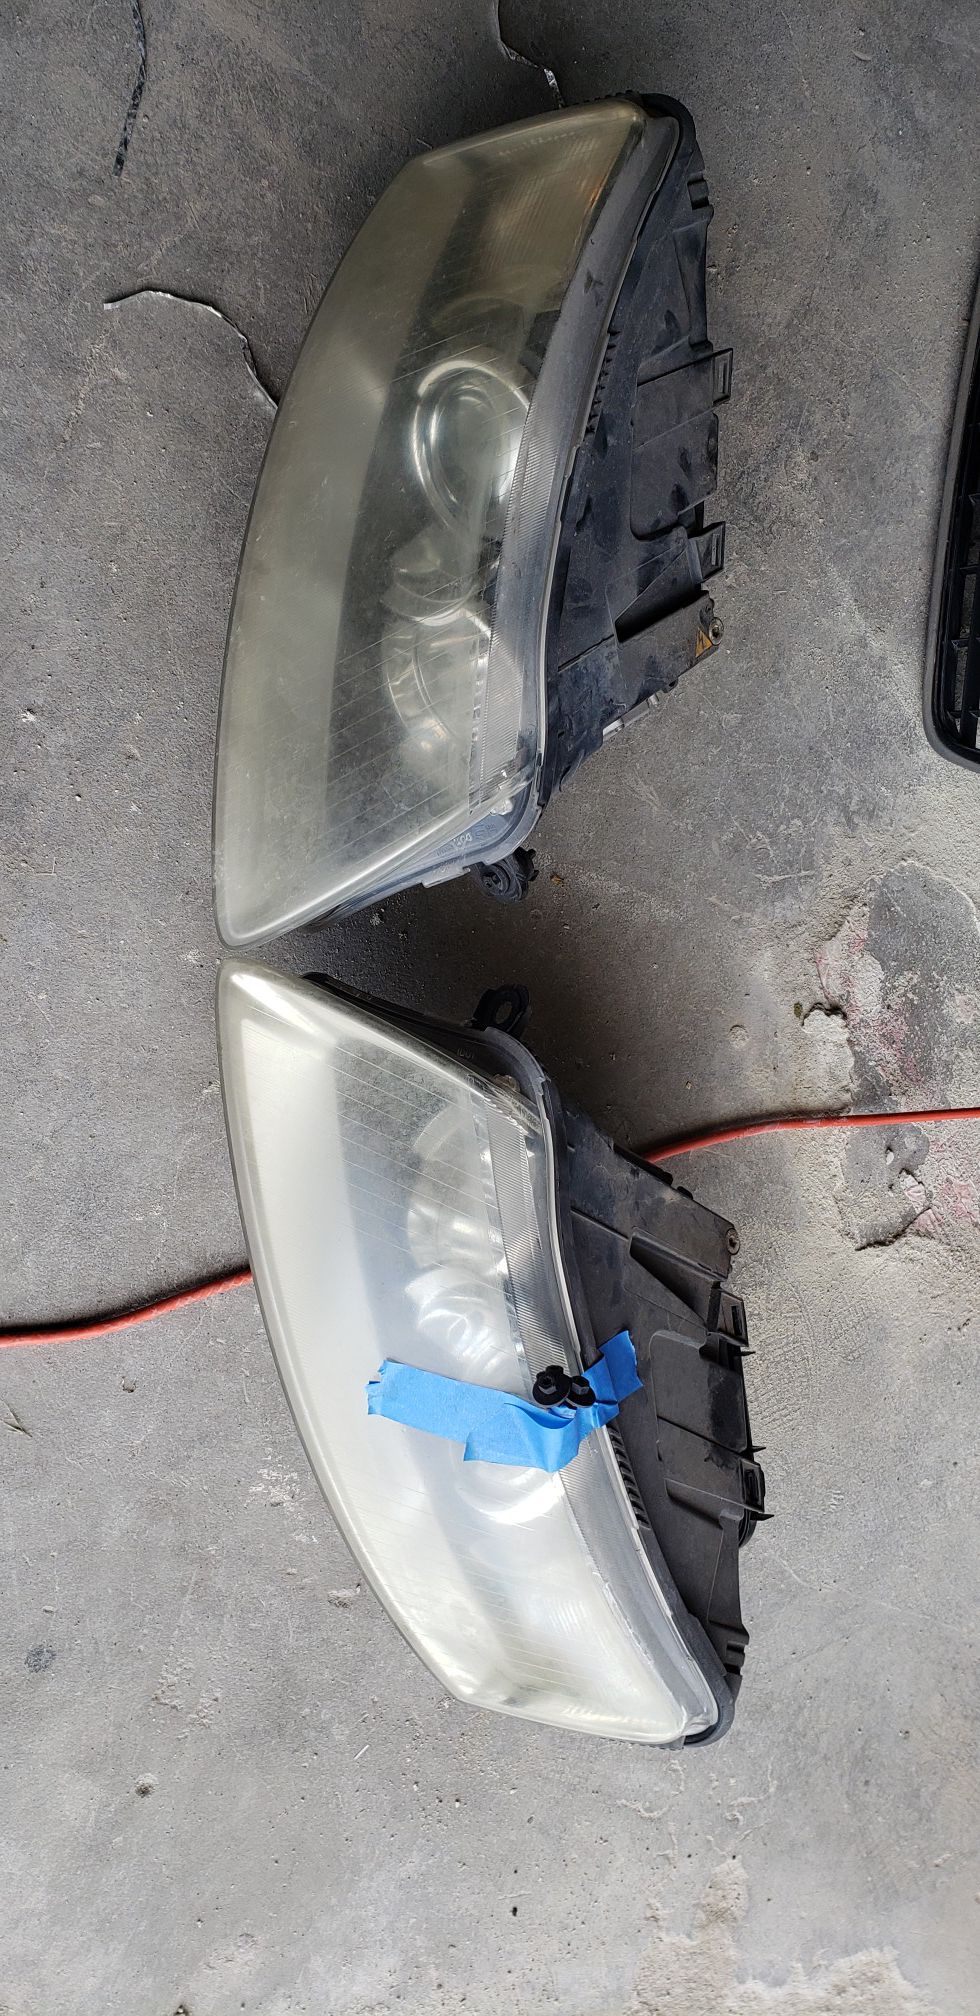 2005 Audi A6 front headlights $300 OBO